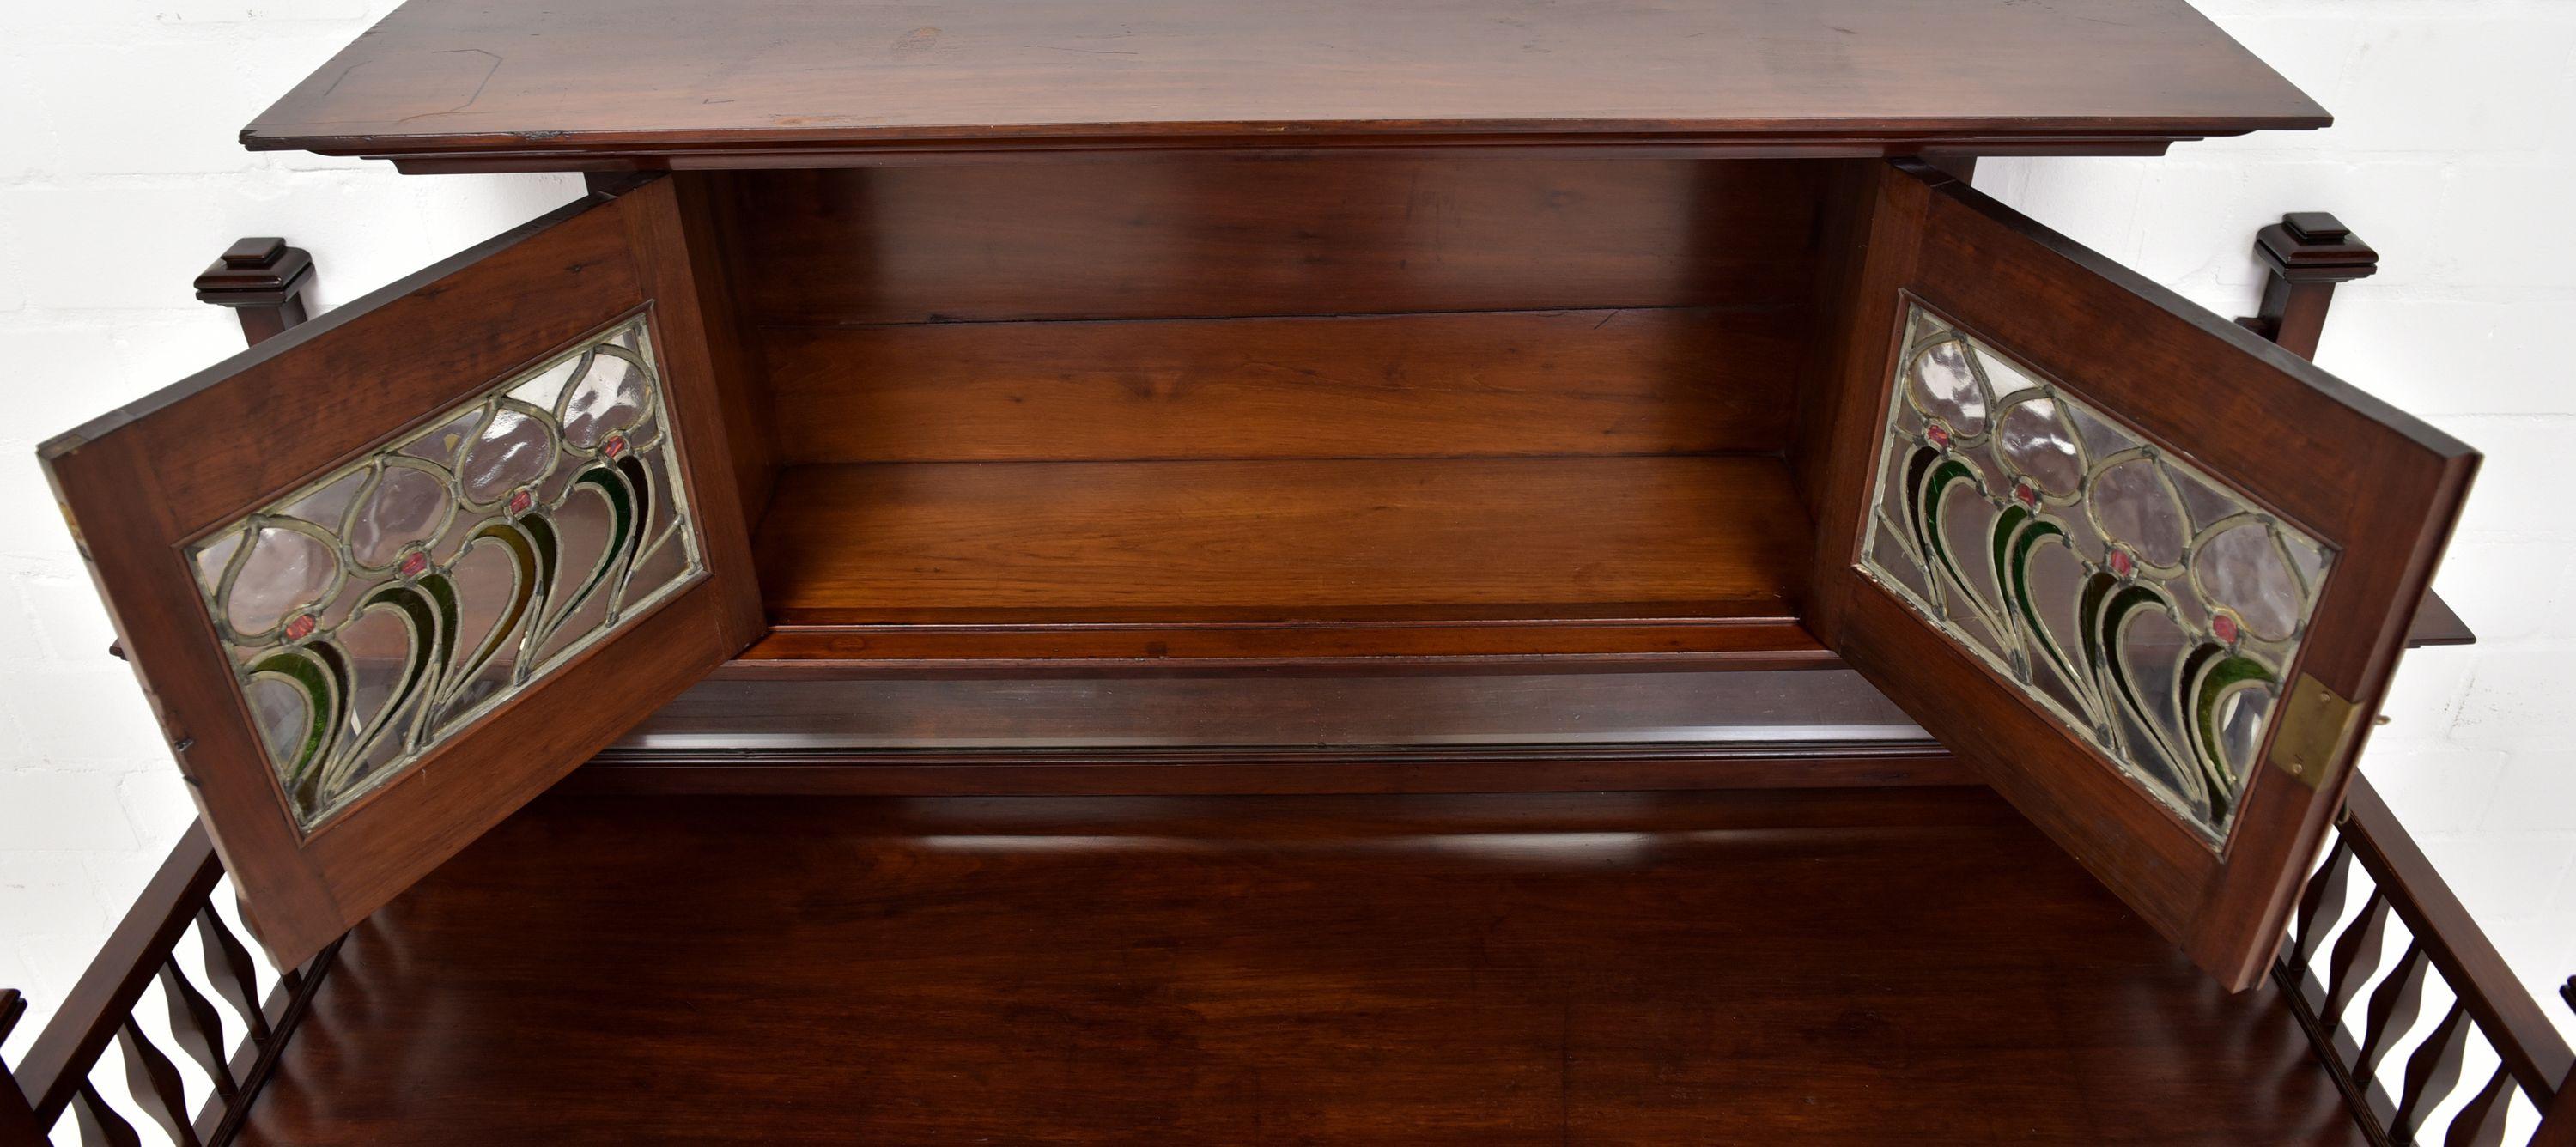 Patinated Art Nouveau Buffet Cabinet / Credenza / Sideboard in Mahogany, circa 1900 For Sale